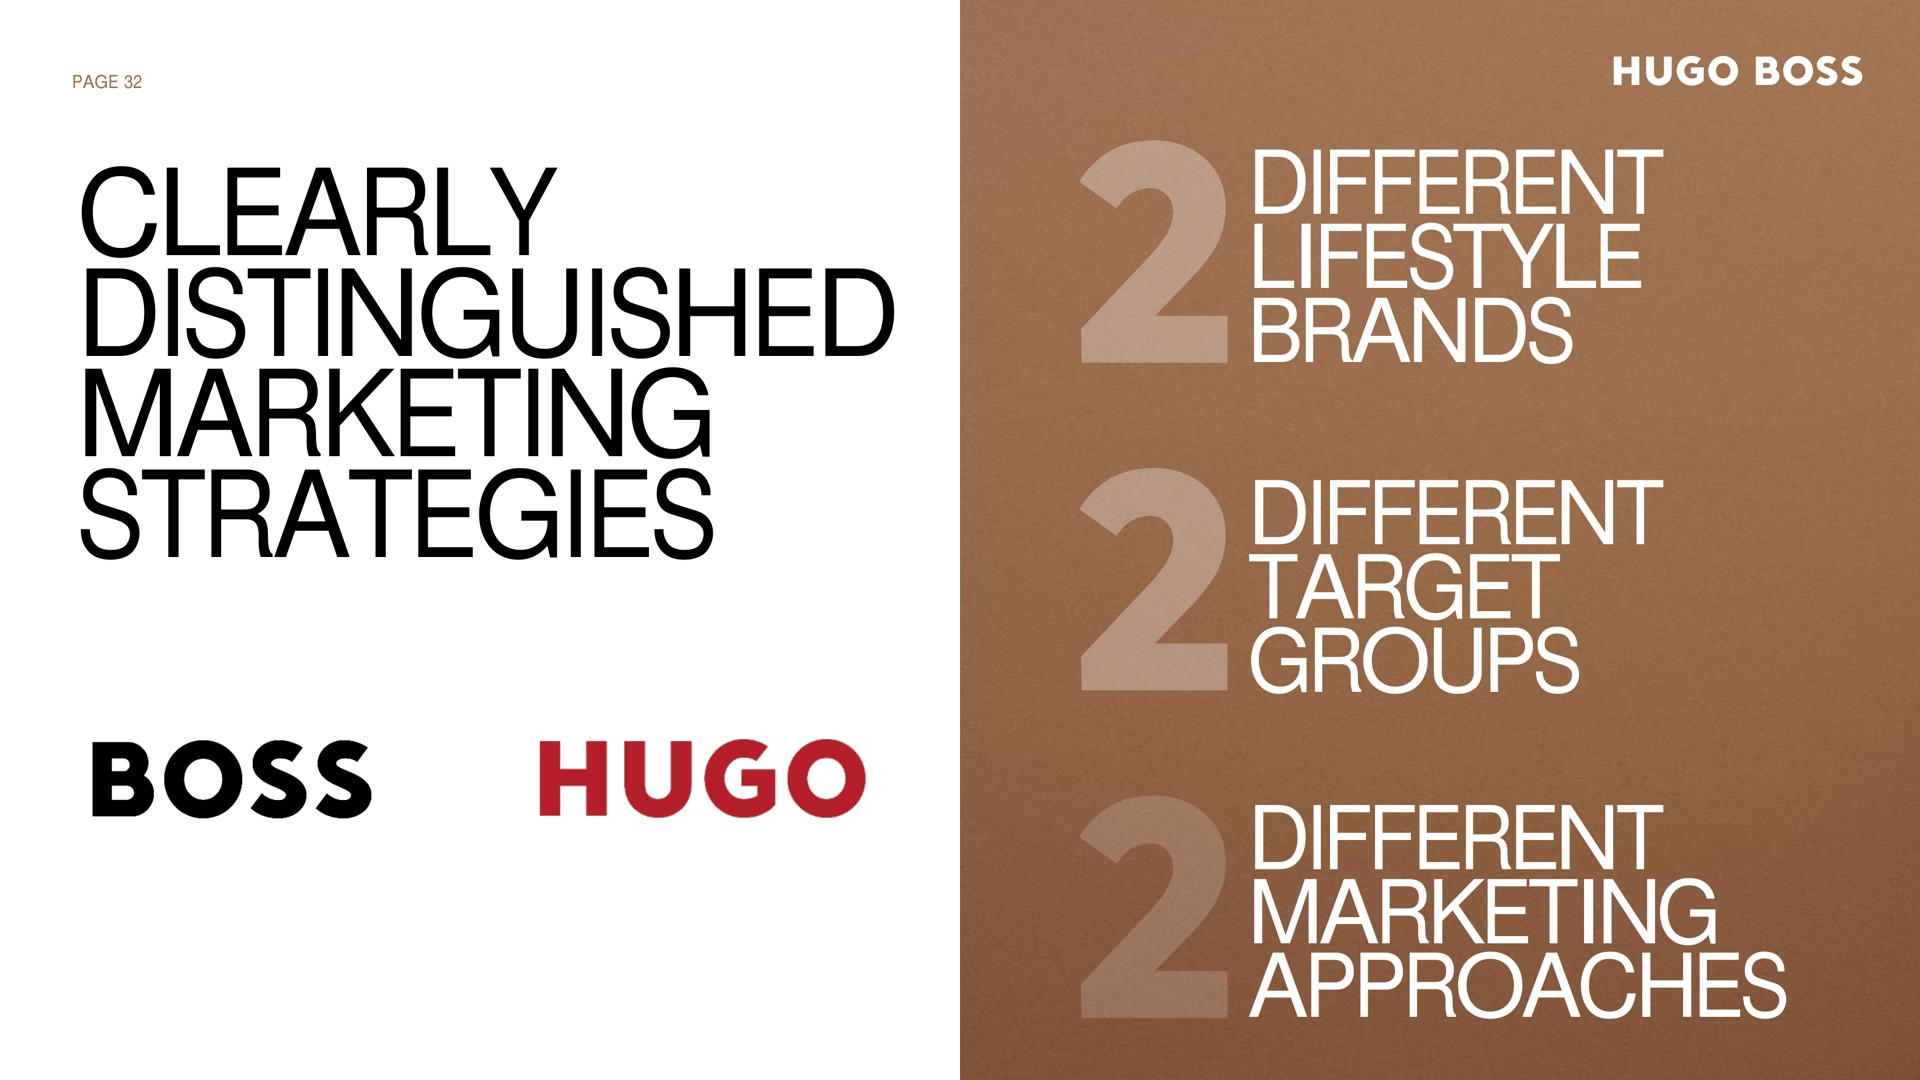 clearly distinguished marketing strategies different brands different target groups different marketing approaches boss sans boss | Hugo Boss